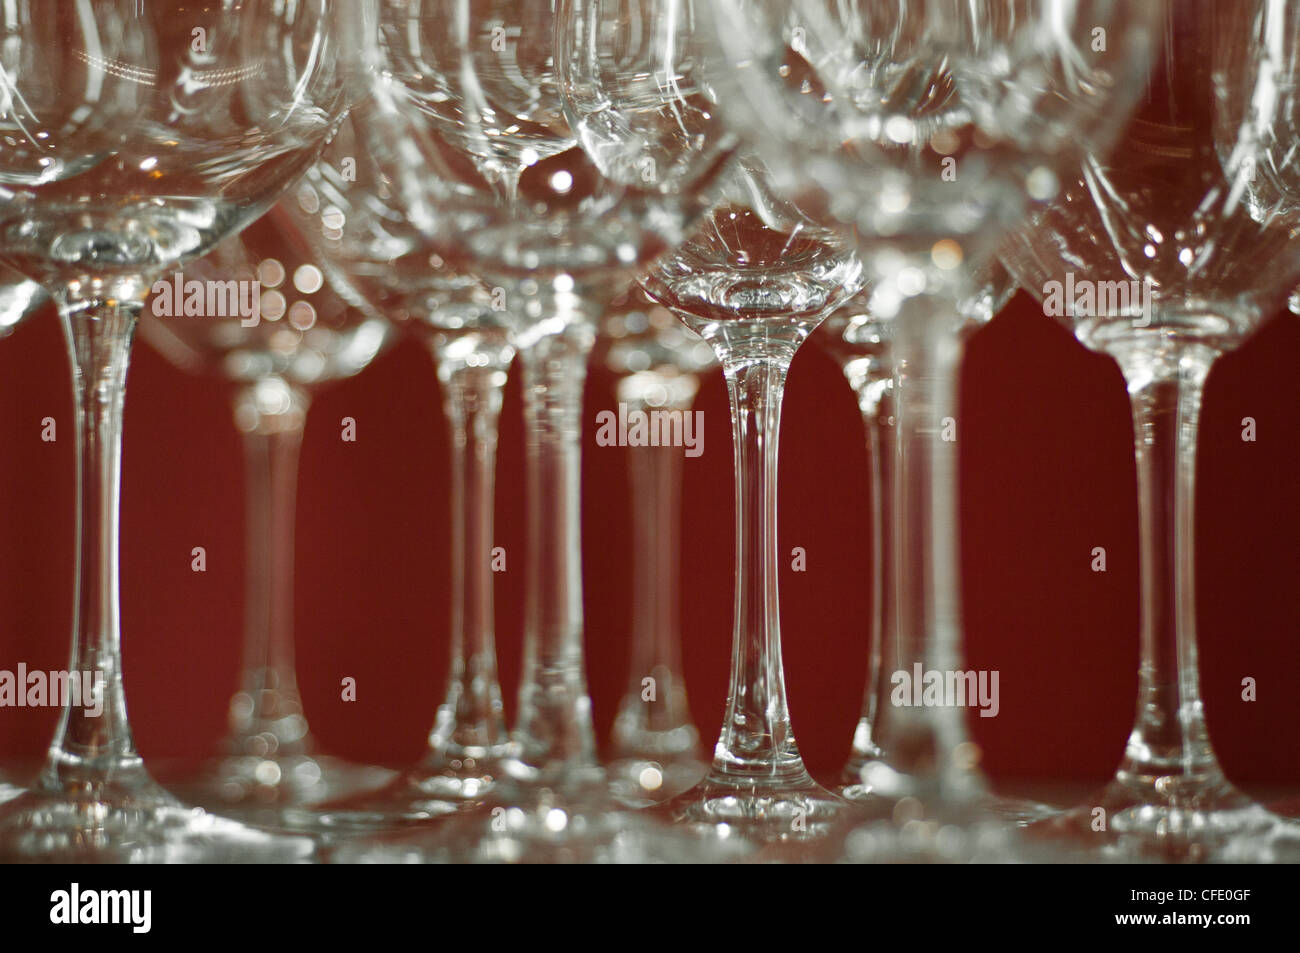 Bavaria Glass High Resolution Stock Photography and Images - Alamy